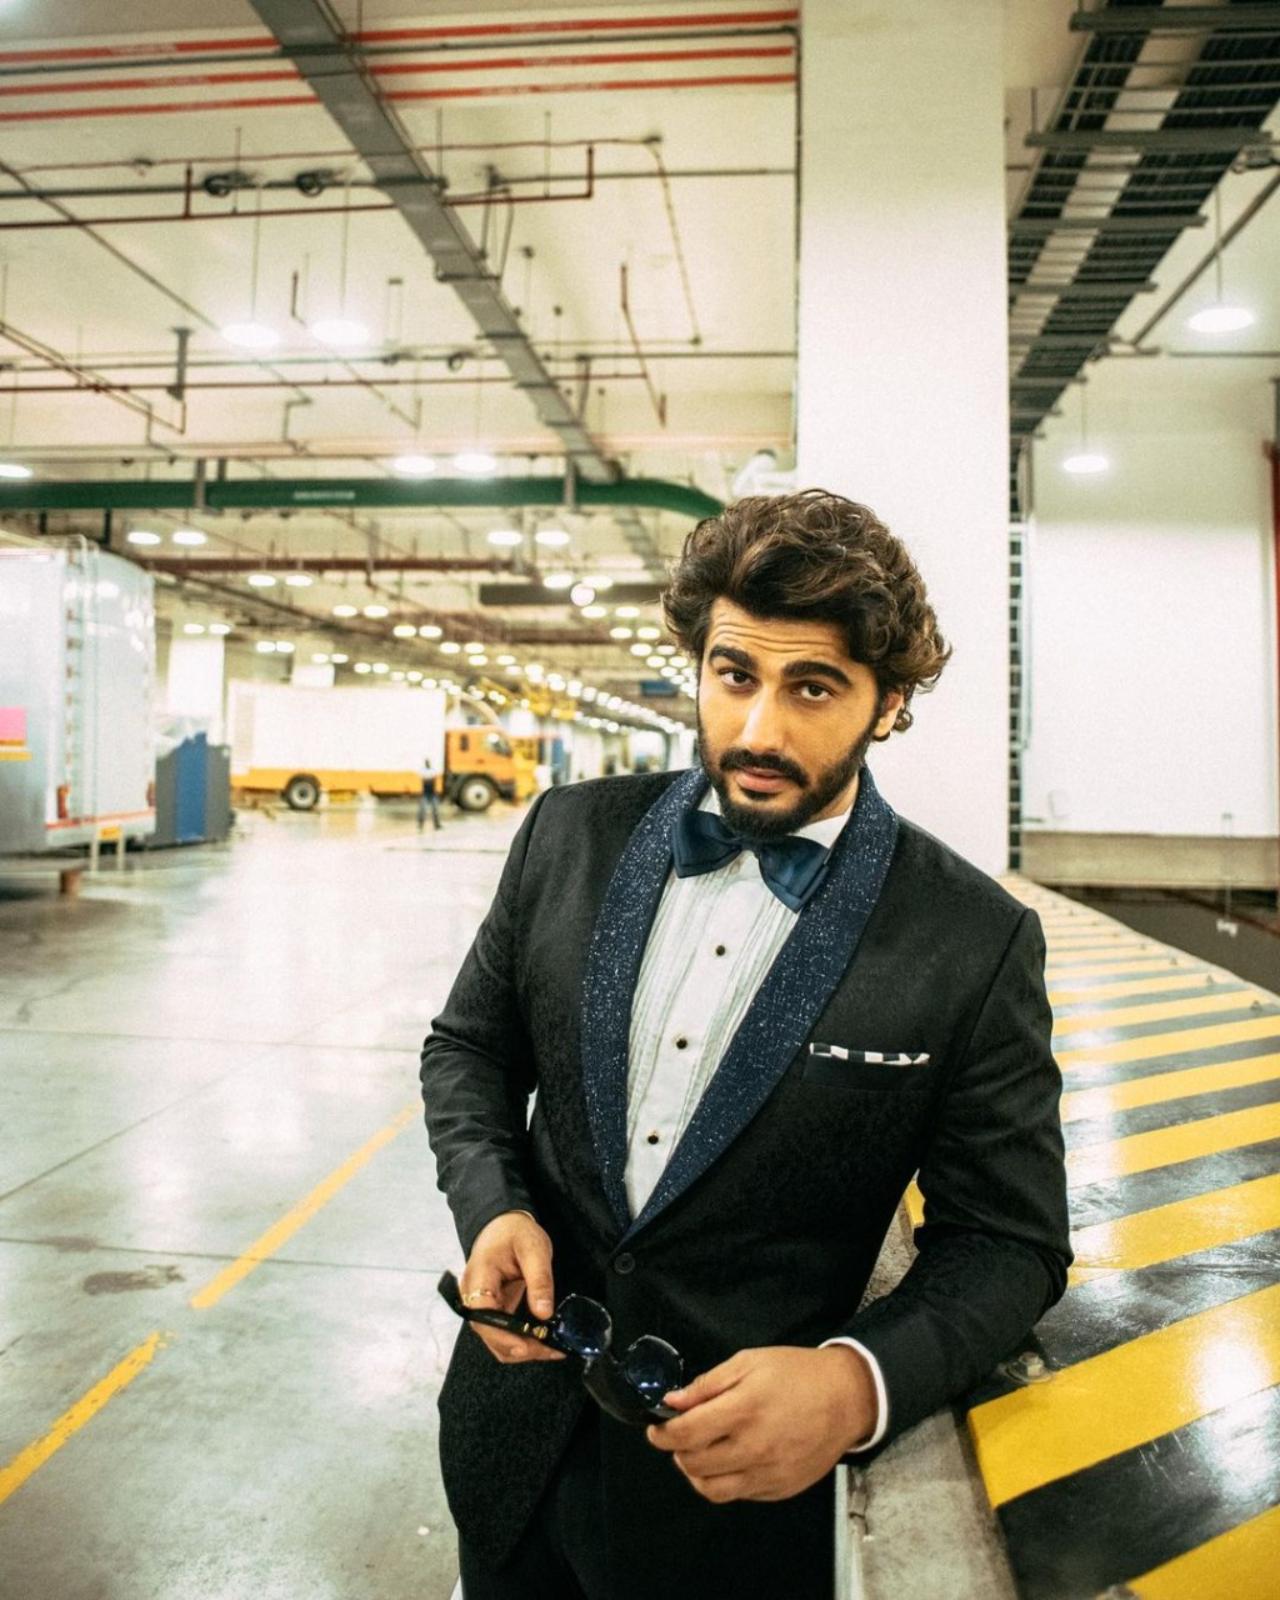 Arjun Kapoor 
Arjun Kapoor was not much into academics. After failing class 12, he quit his studies. He later did a certification course from Asian Academy of Film and Television